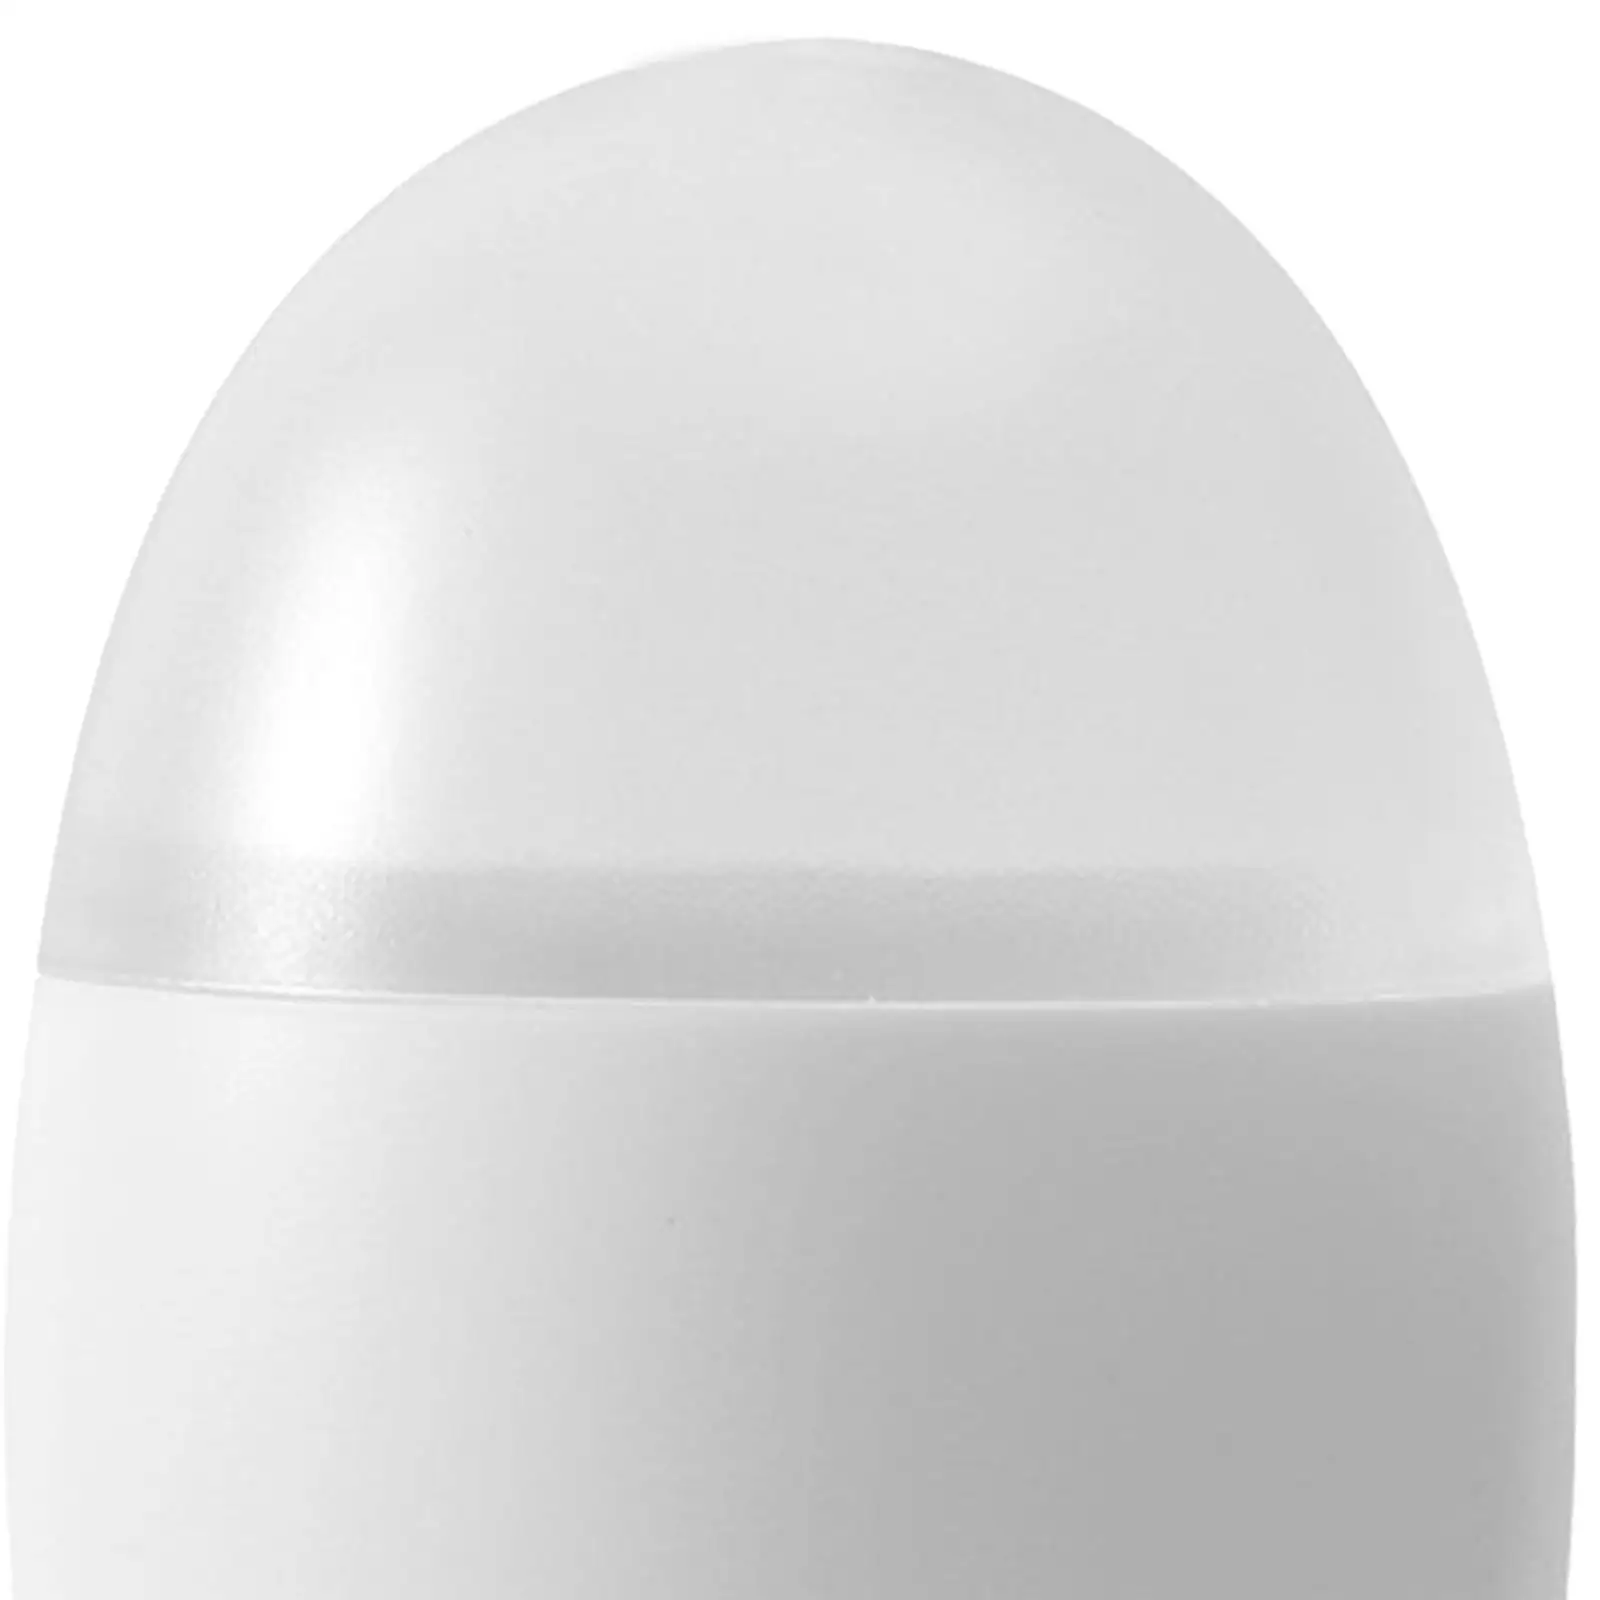 Creative Toothpick Box with Lid Stylish Fridge Suction Egg Shape for Tabletop Household Hotel Home Decoration